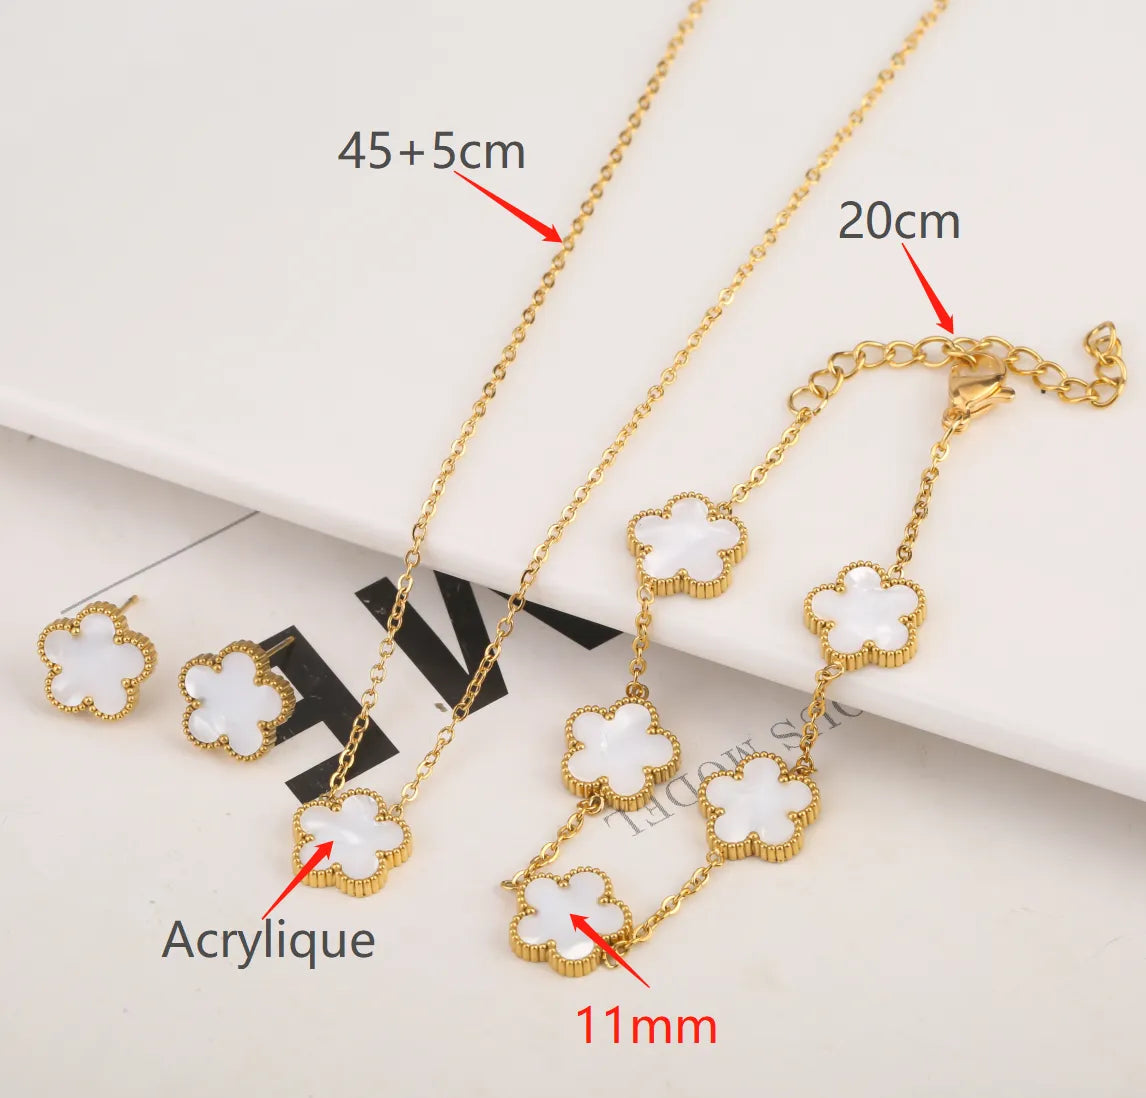 Adjustable New Design Gold Plated Stainless Steel 316L Plant Flower Bracelet With Five Leaf Petals Women's Luxury Gifts Clover